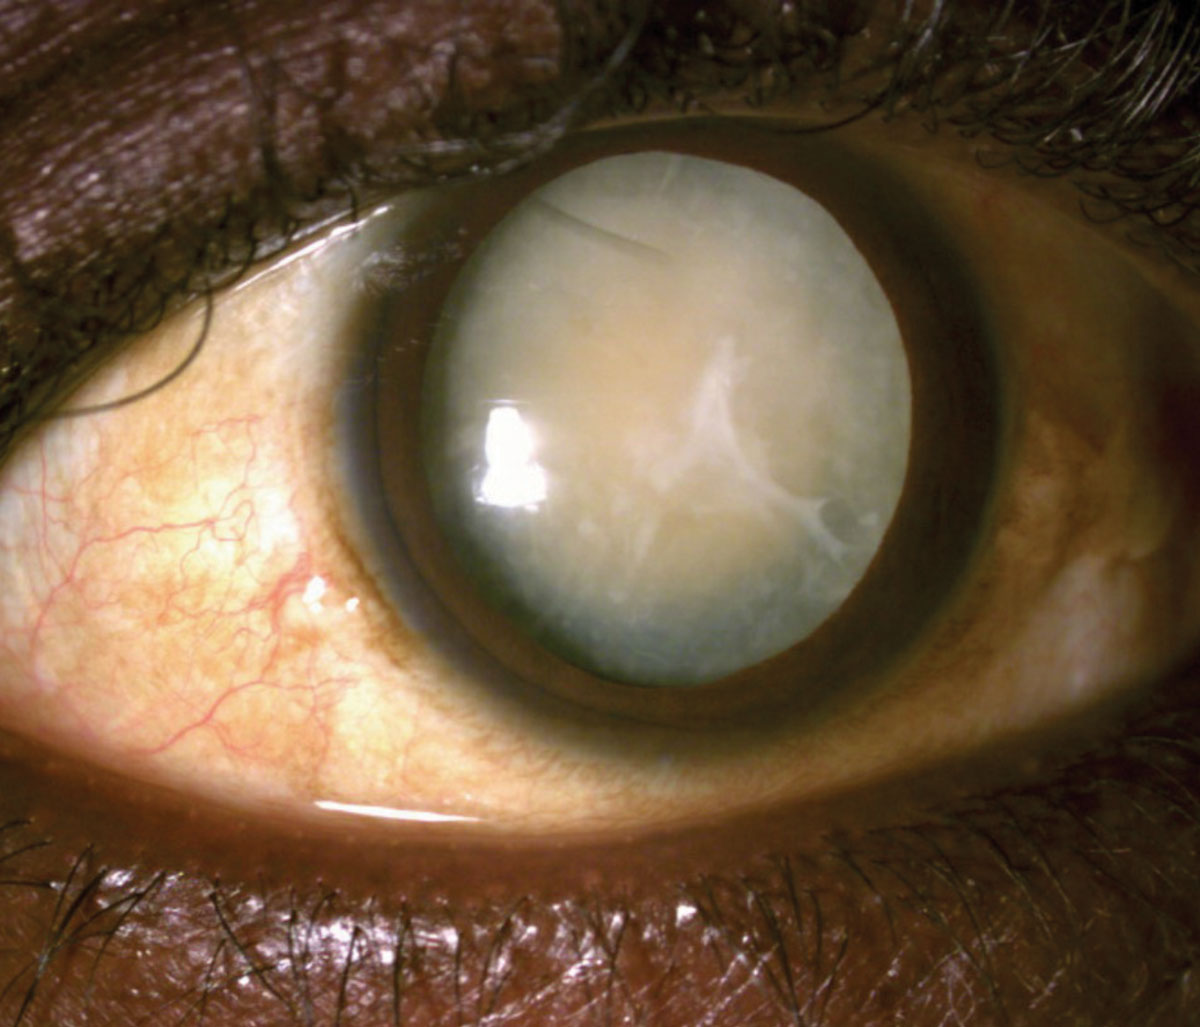 Various systemic drugs were linked to cataract development in this study.